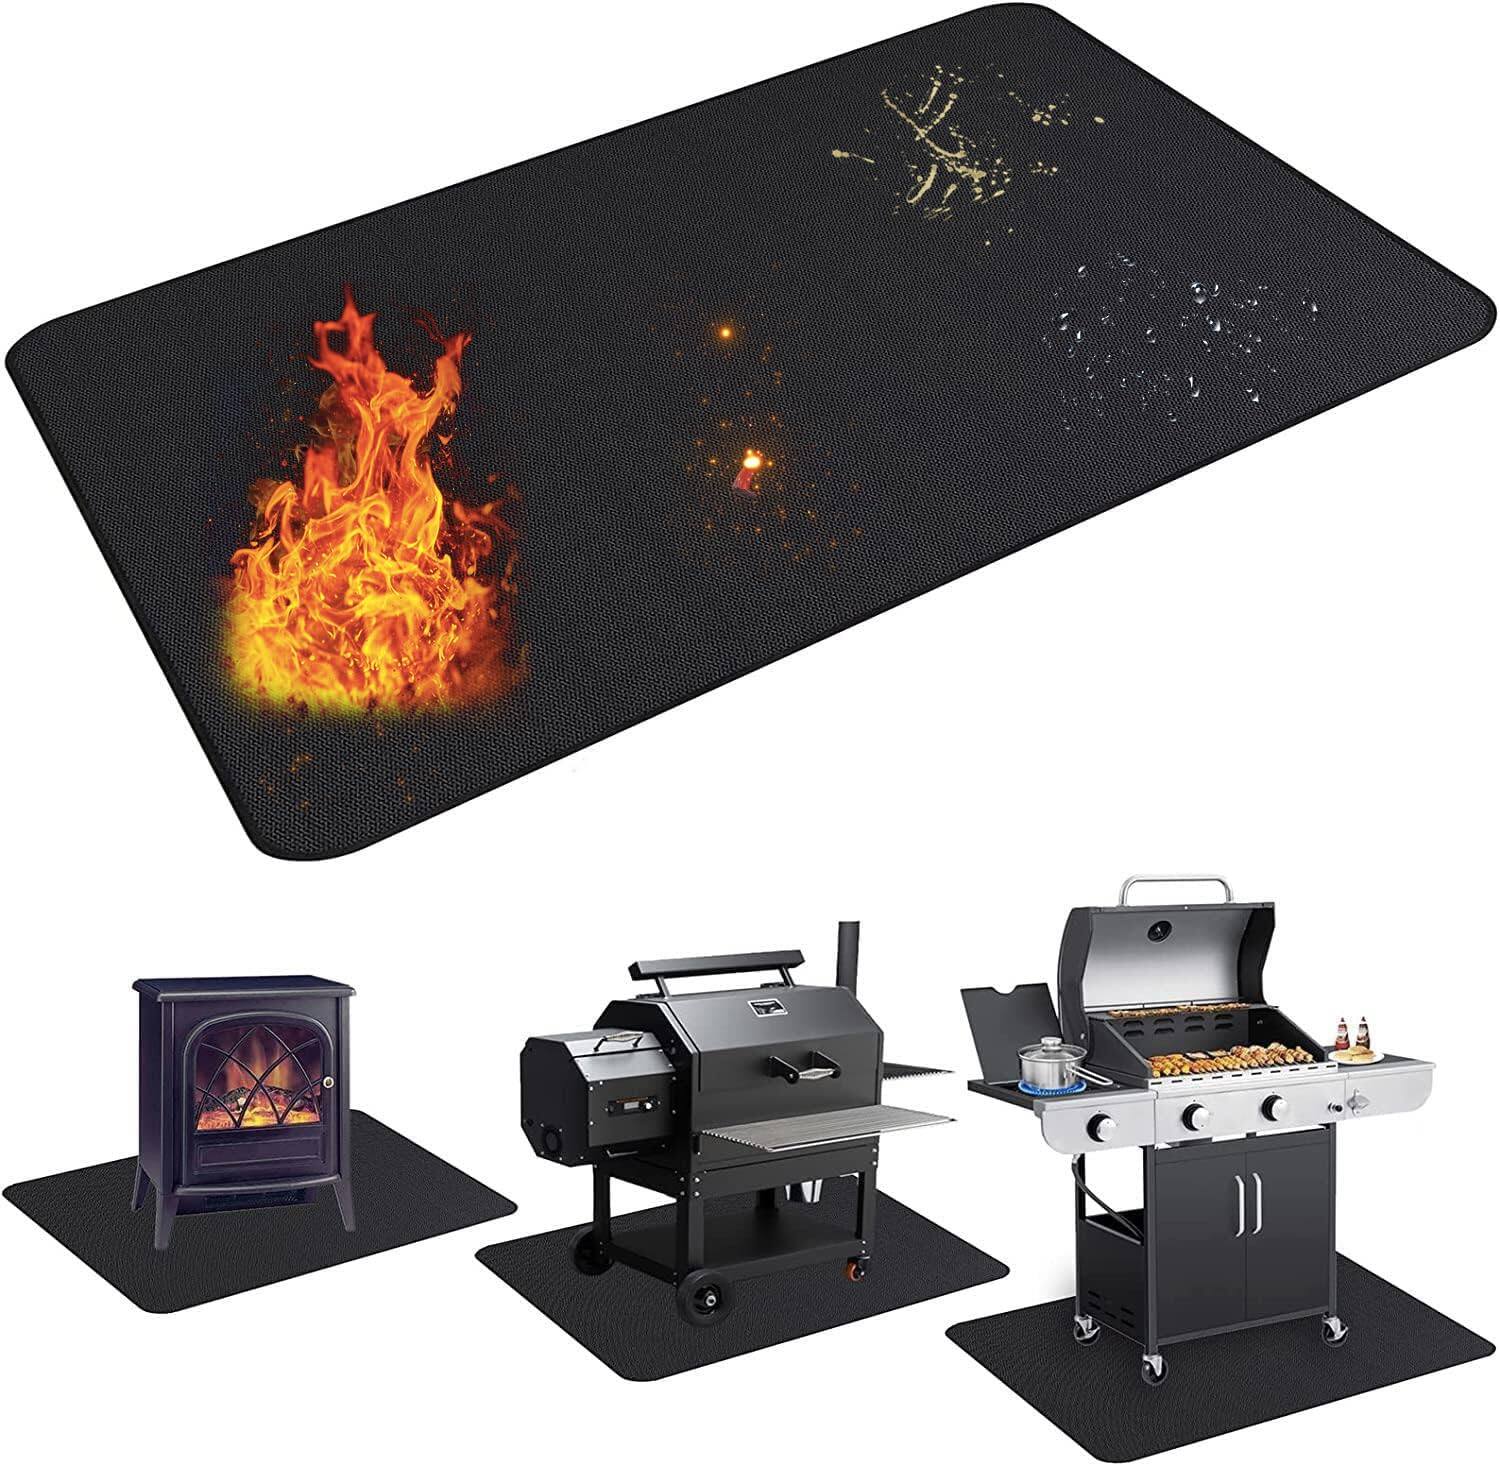 Double Sided Fire Retardant Outdoor Grill Mat -OEM/ODM Grill Factory